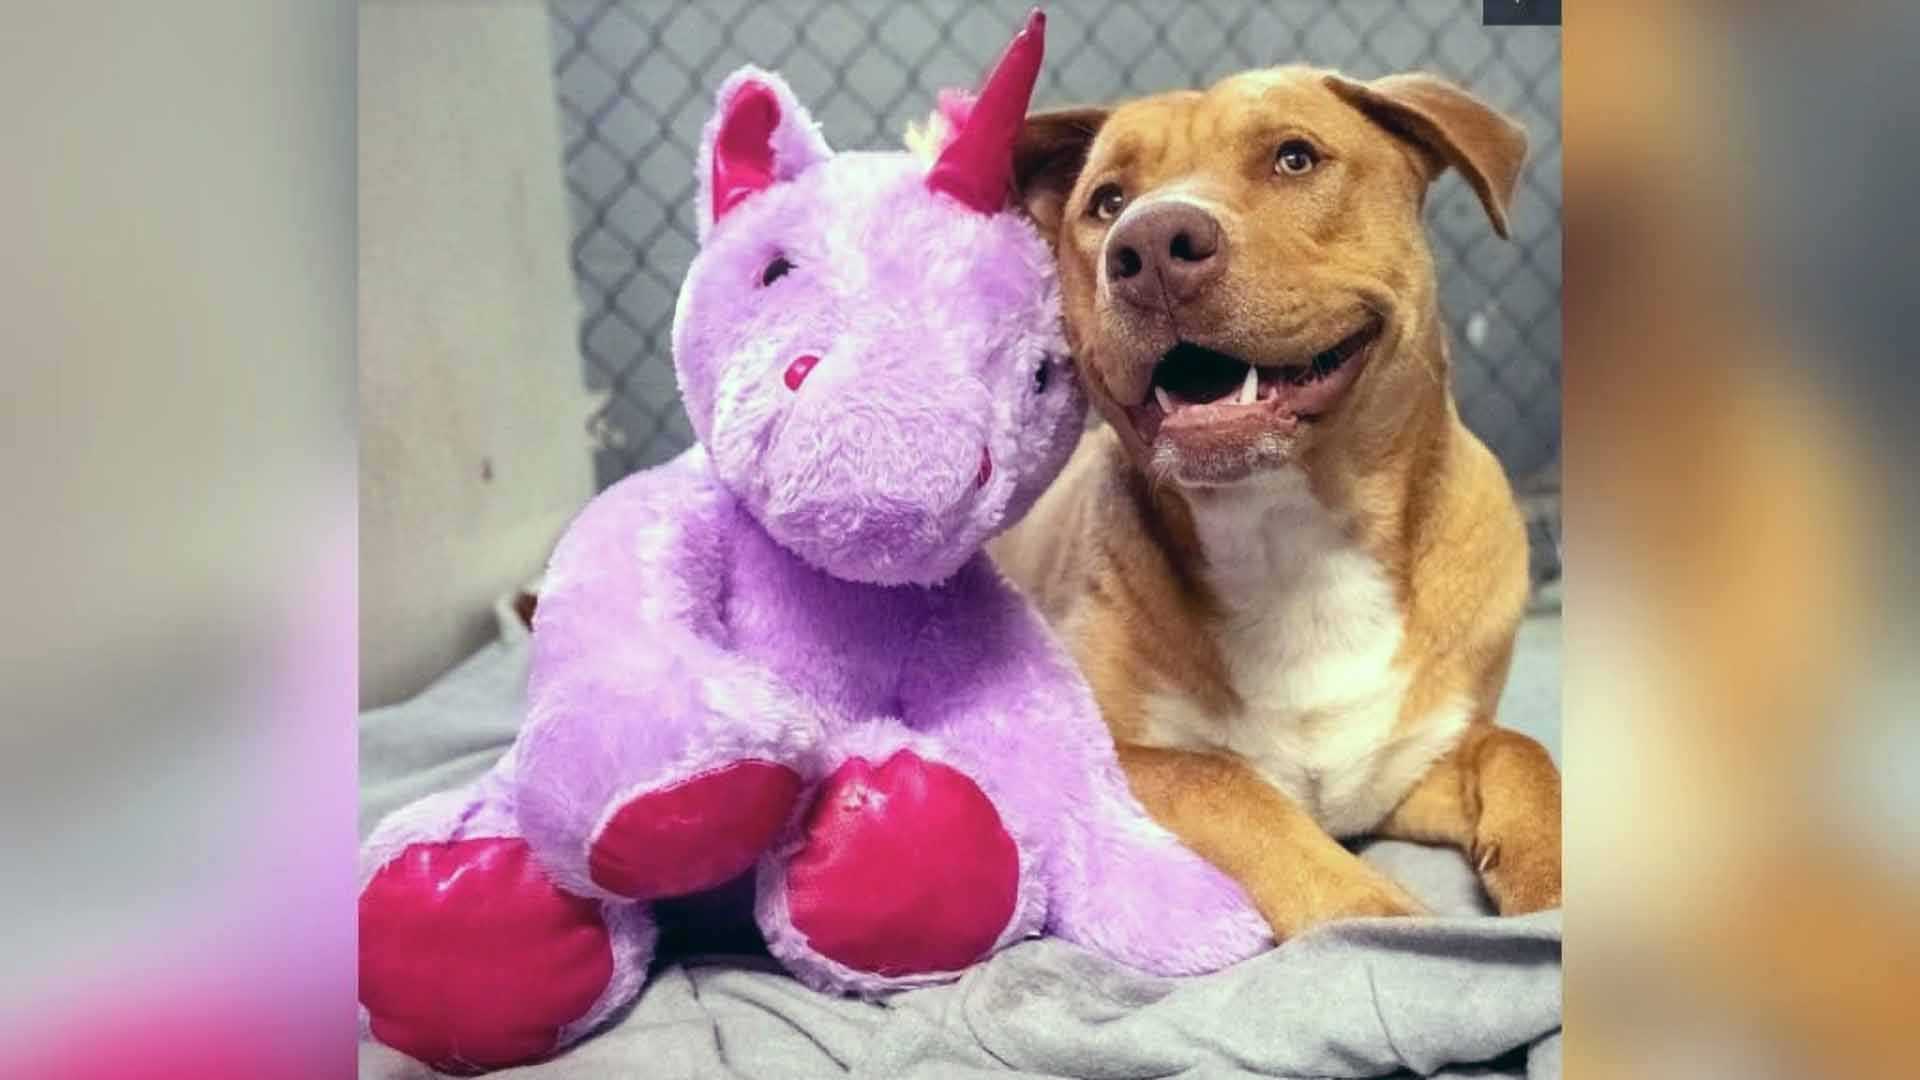 Lonely stray dog steals dollar general unicorn for comfort